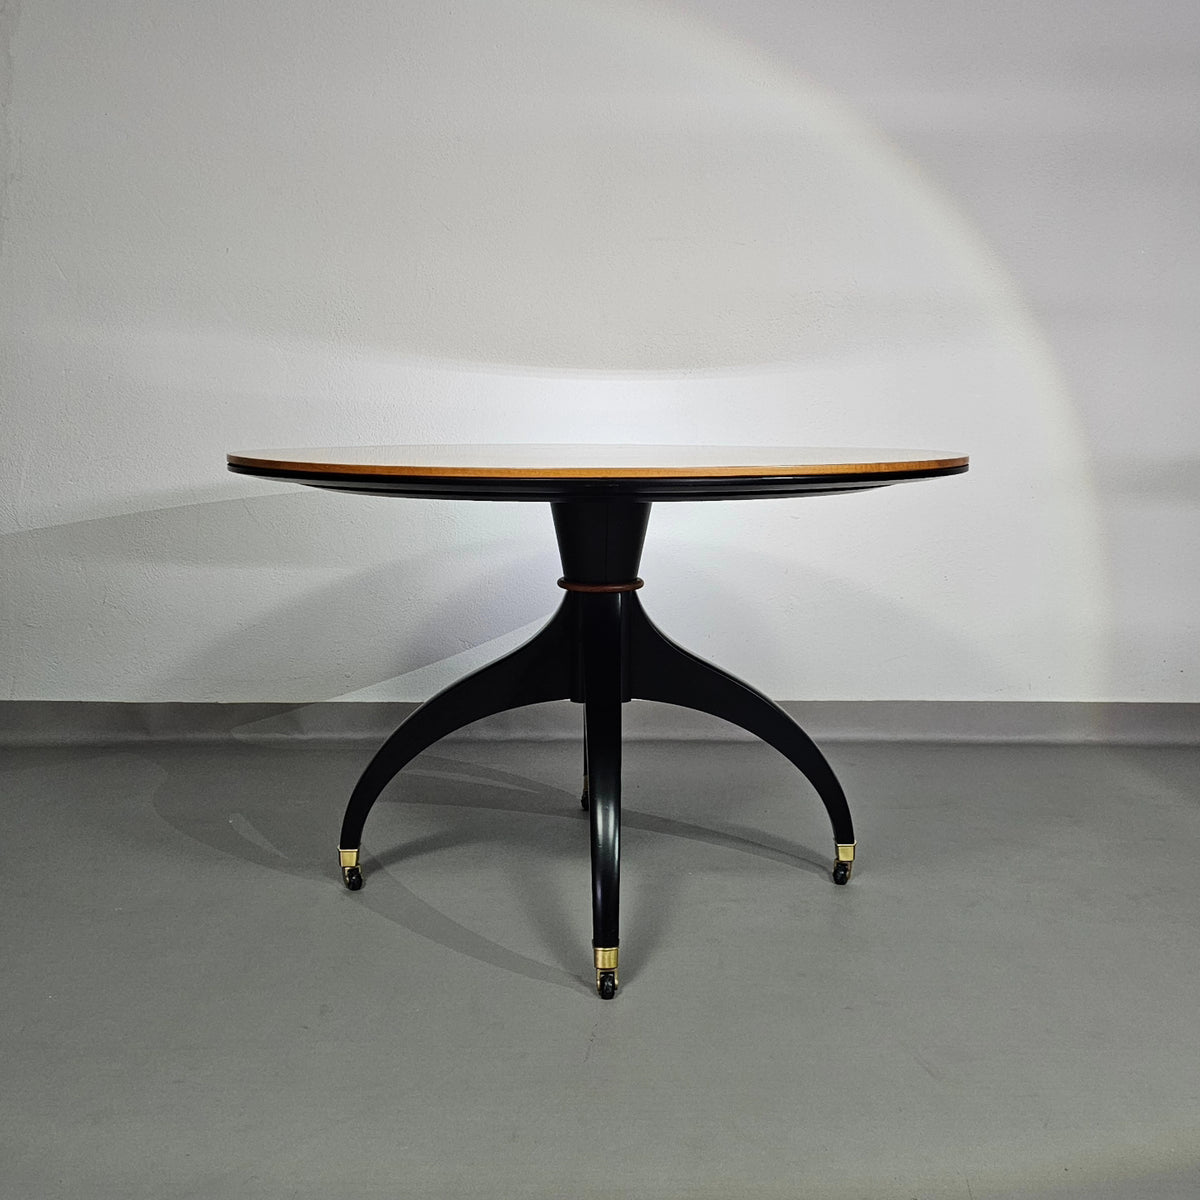 Circular table signed Giorgetti from the 80s